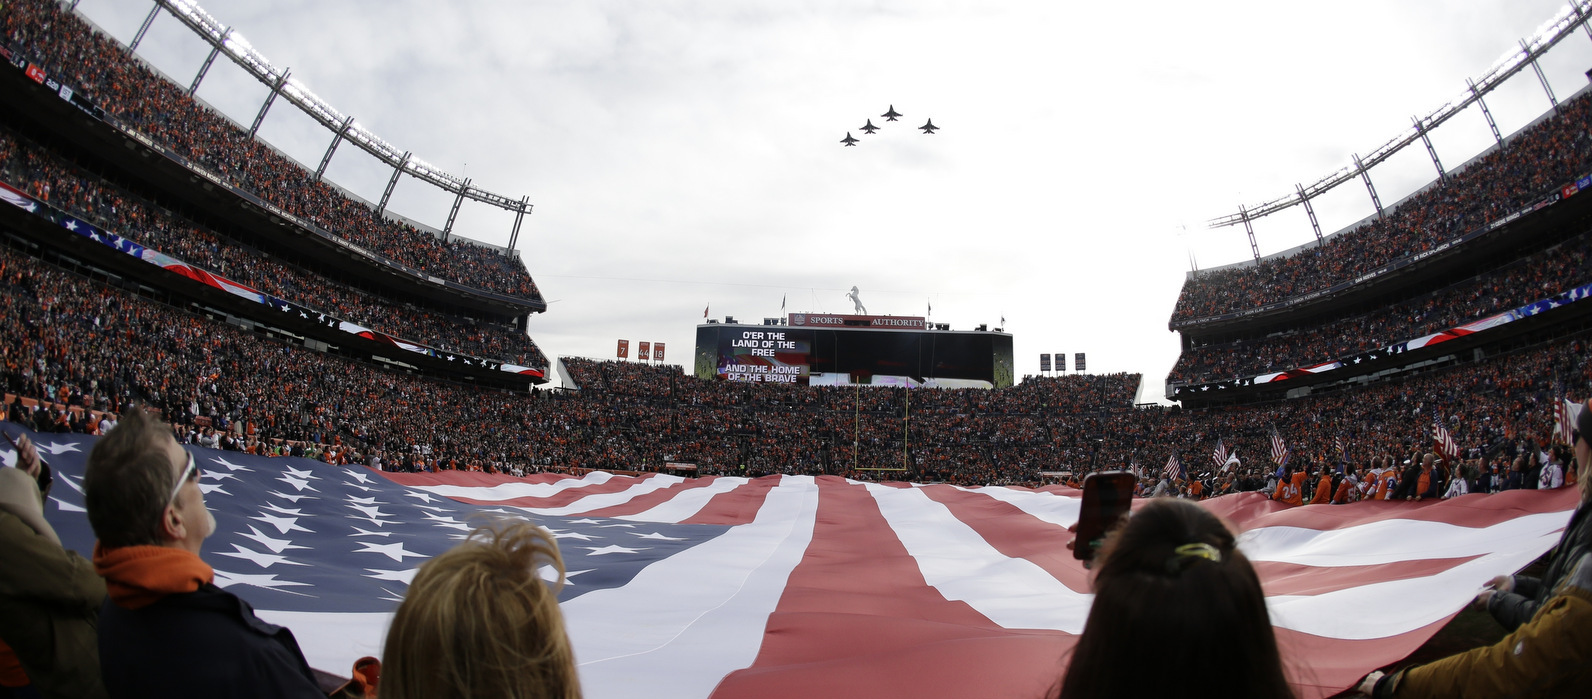 A giant U.S. flag is displayed during a military fly-over at Sports Authority Field at Mile High before an NFL football game between the Denver Broncos and the Oakland Raiders, Sunday, Jan. 1, 2017, in Denver. (AP/Jack Dempsey)